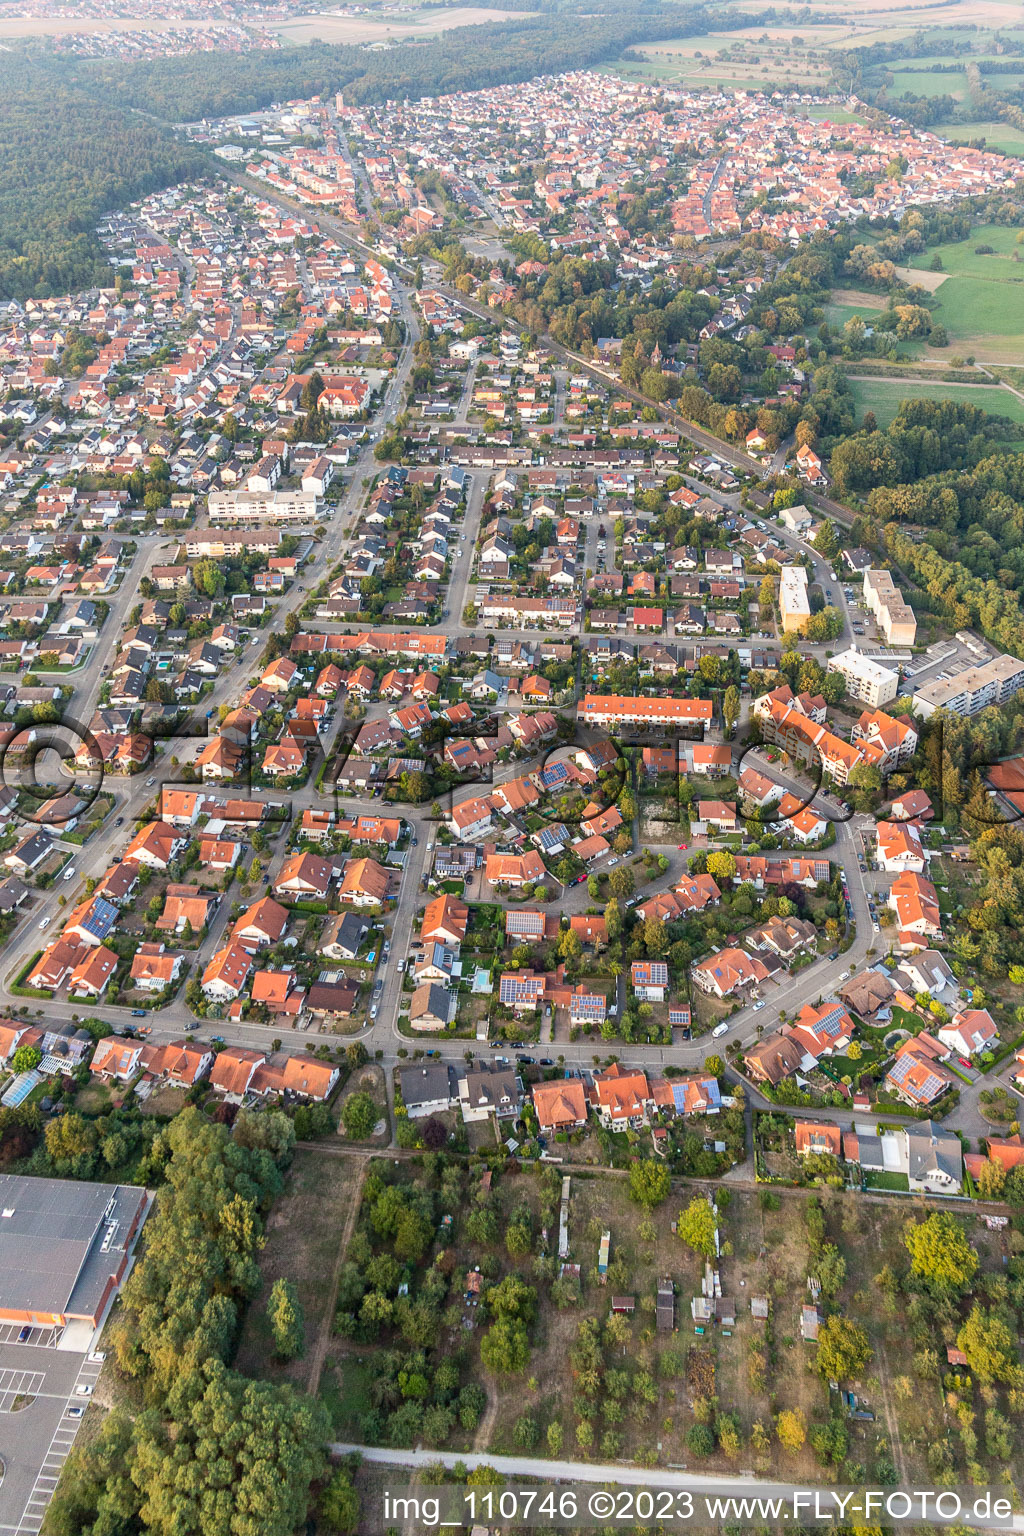 Drone image of Jockgrim in the state Rhineland-Palatinate, Germany